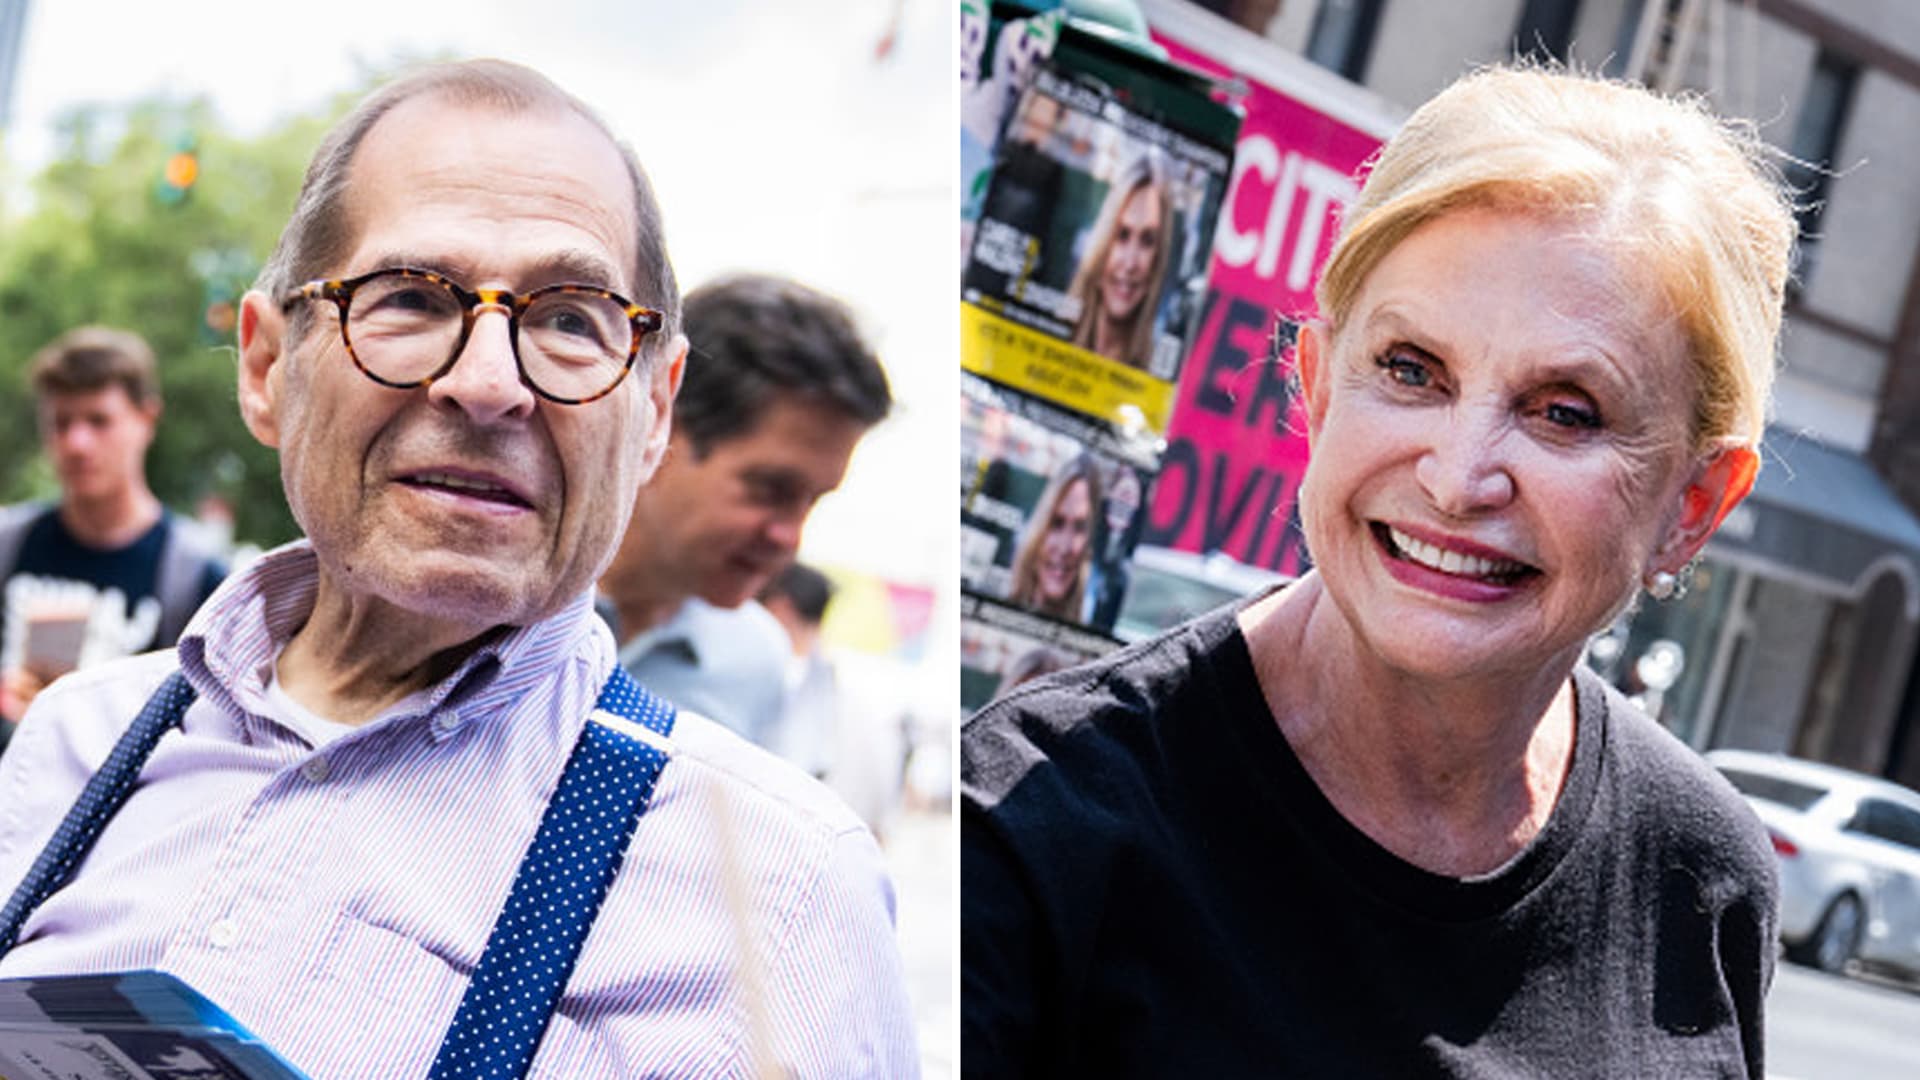 Top Democrats Jerry Nadler, Carolyn Maloney face off in Fresh York House well-known